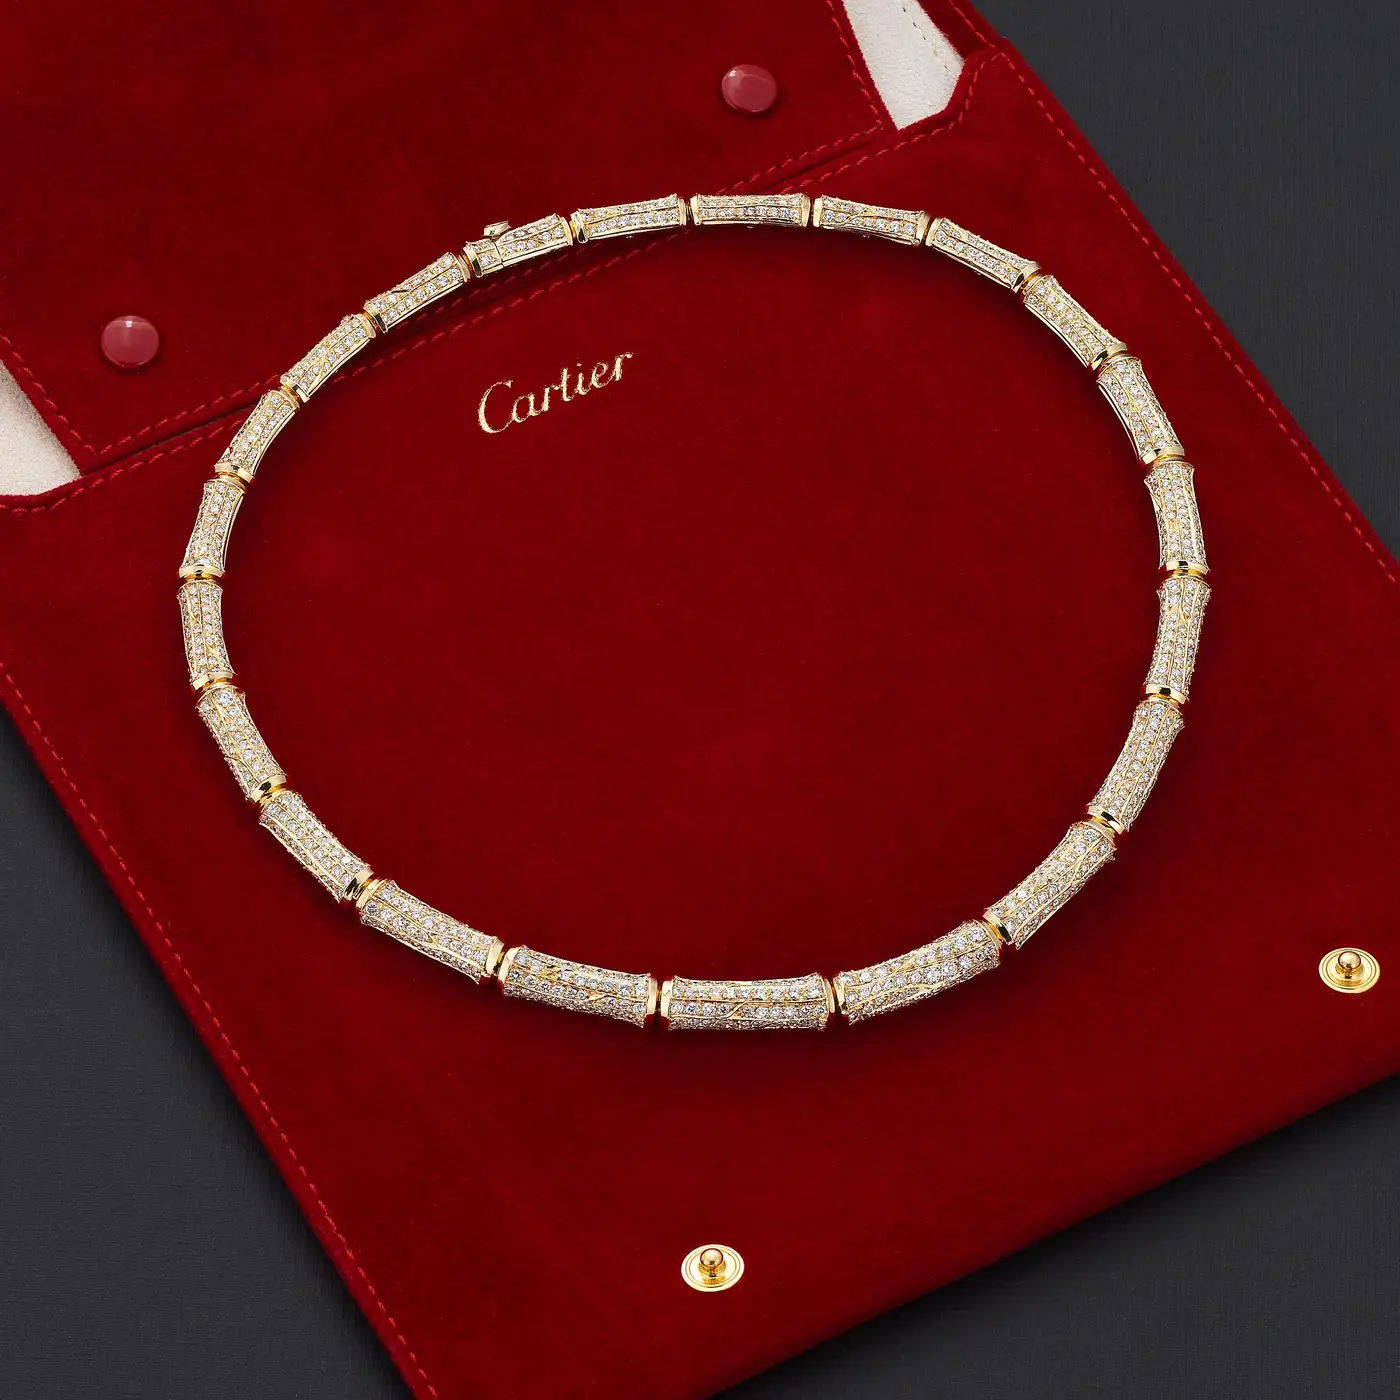 Cartier-26cts-Diamond-Bamboo-Suite-in-18K-Gold-Necklace-and-Earrings-9.webp